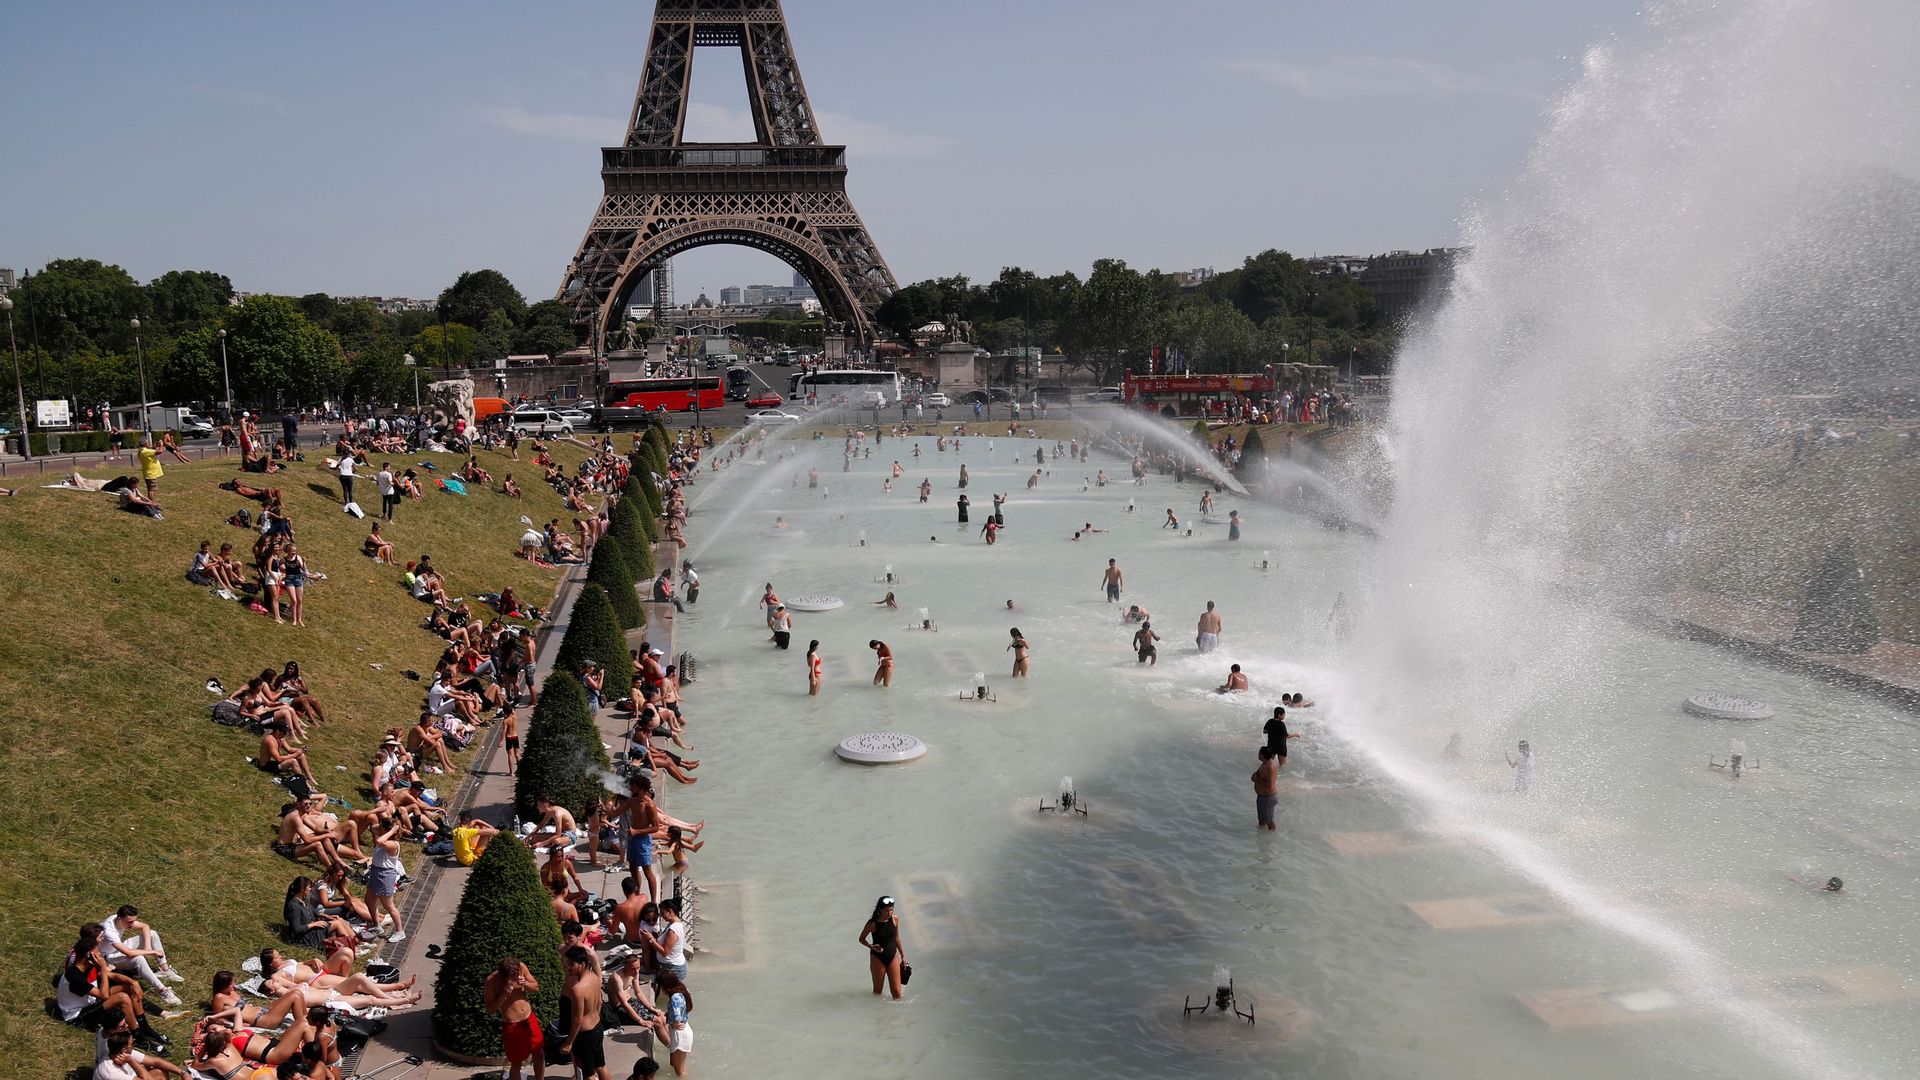 People bathe in the Trocadero Fountain near the Eiffel Tower in Paris during a heatwave on June 28.